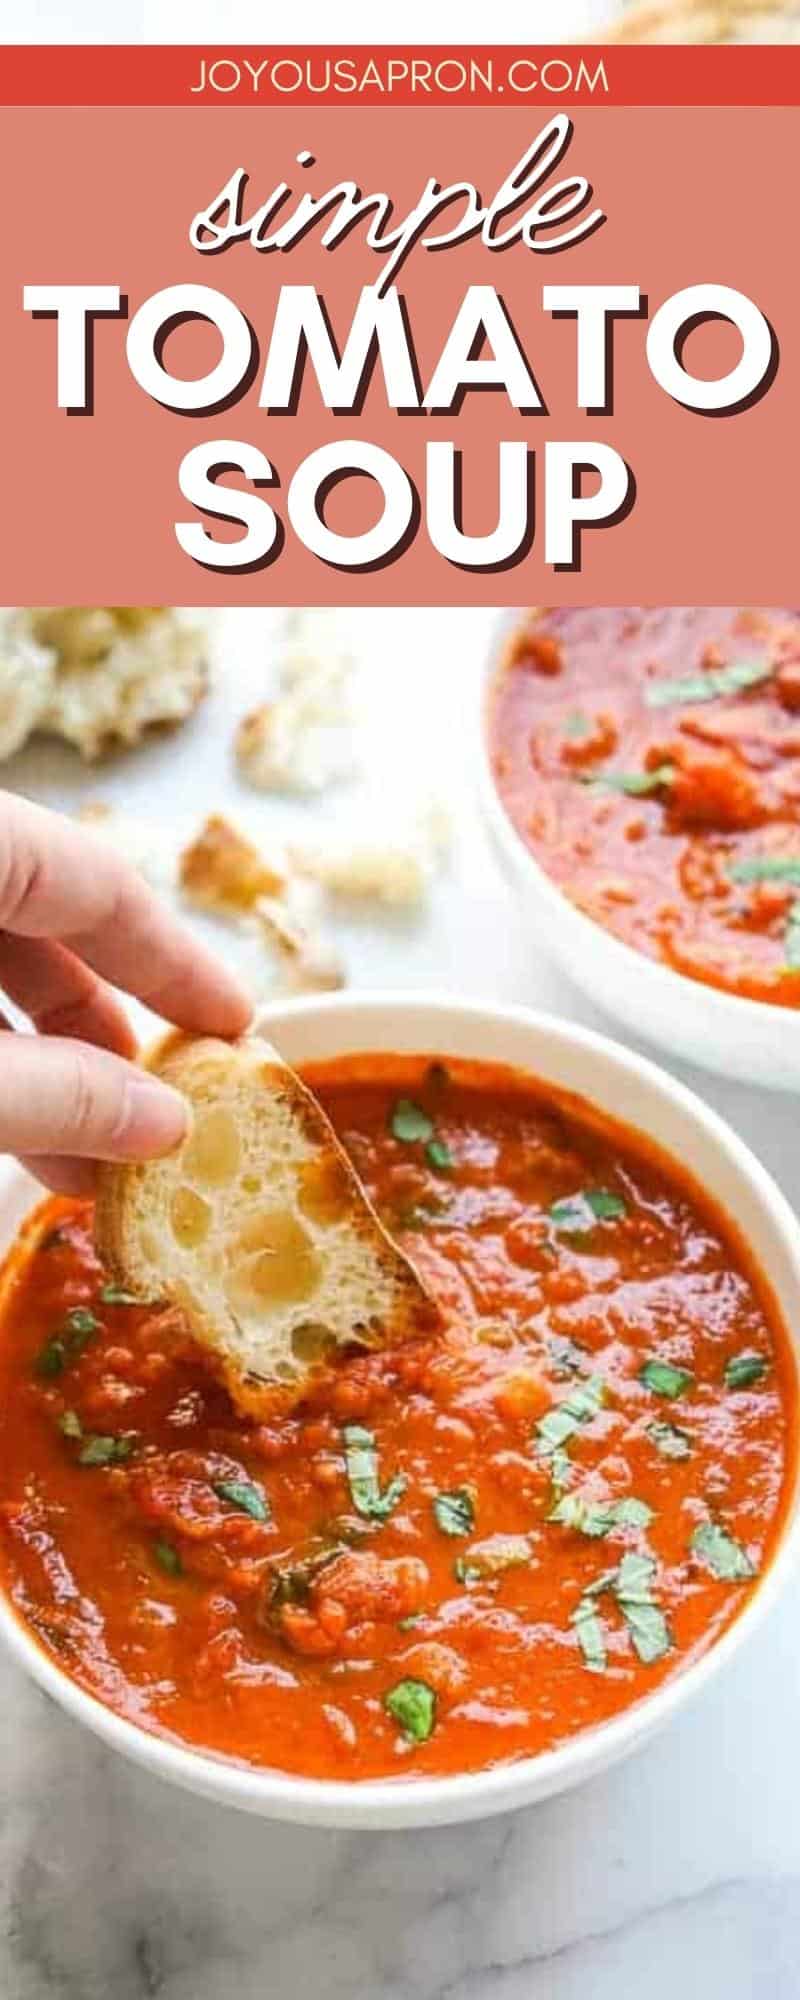 Simple Tomato Soup - Easy, healthy and rich in flavor, this Simple Tomato Soup recipe is made with San Marzano canned tomatoes and infused with herbs and spices. Comfort food and cozy recipe for the Fall and winter. via @joyousapron